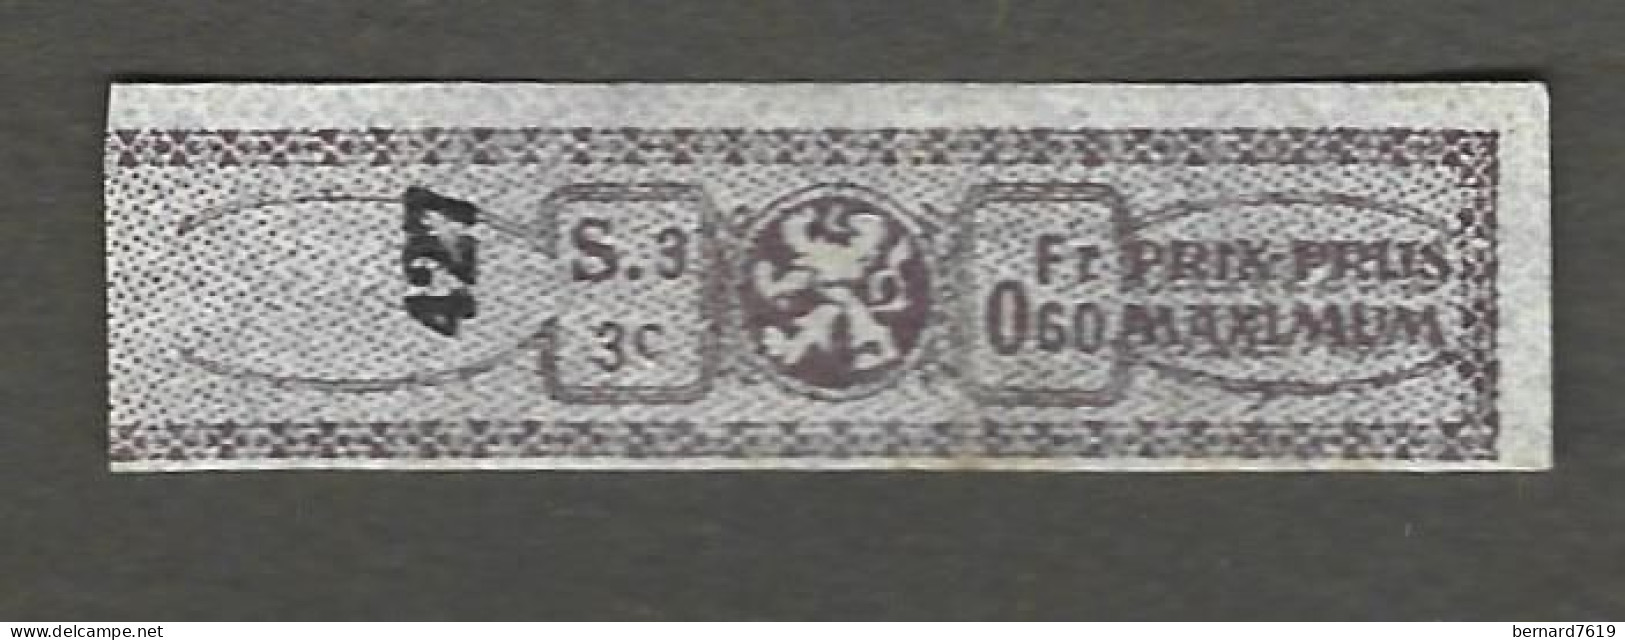 Timbre Taxe  - Tabac -belgique -  - Prix Pruss Maximun - Annee 1870 - 1900 - Stamps